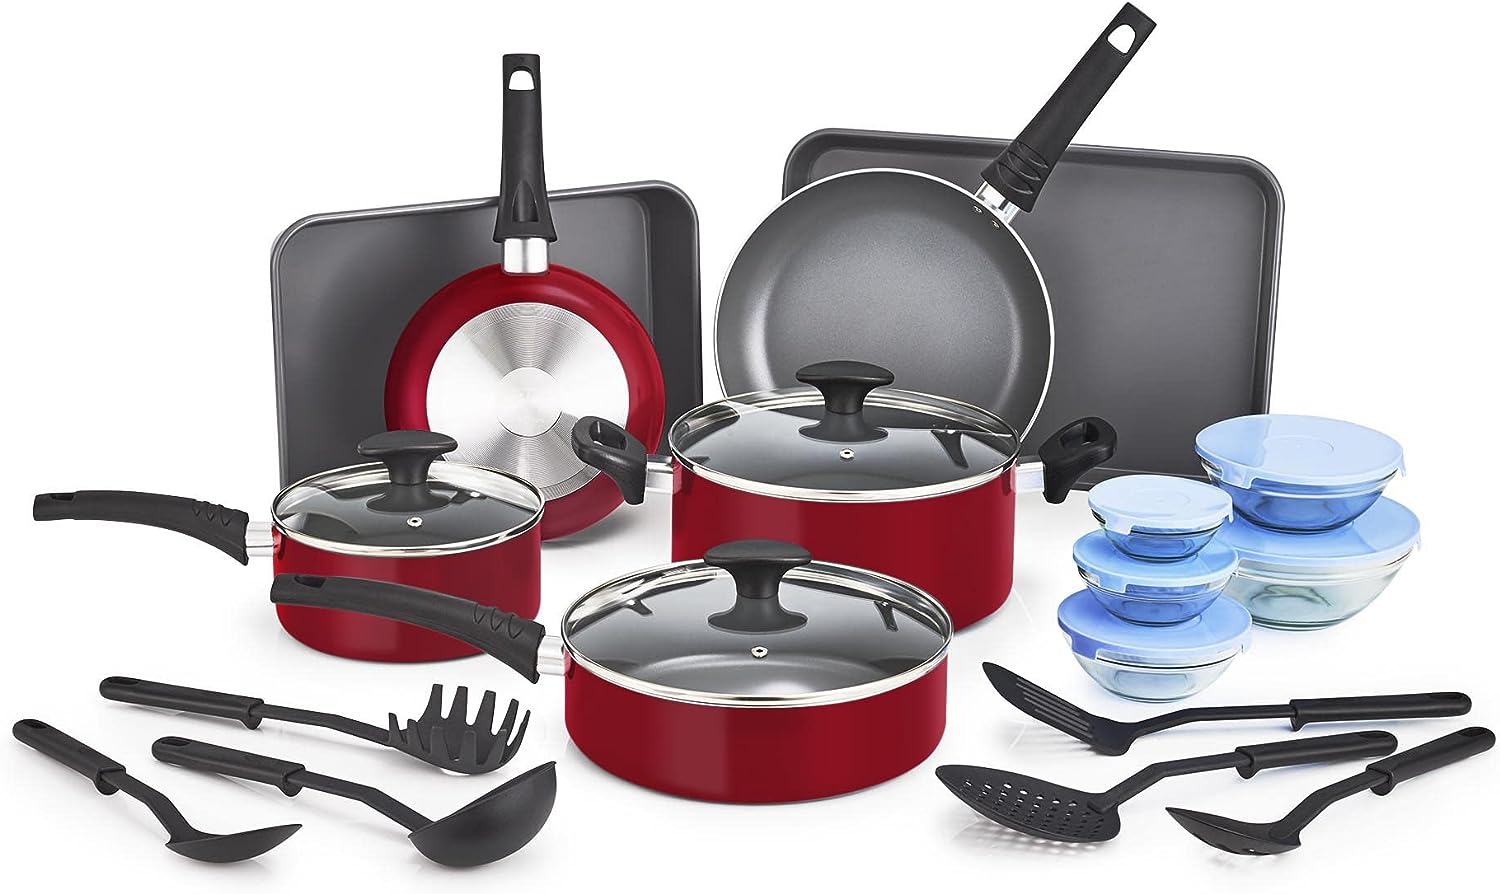 BELLA Nonstick Cookware Set with Glass Lids Review